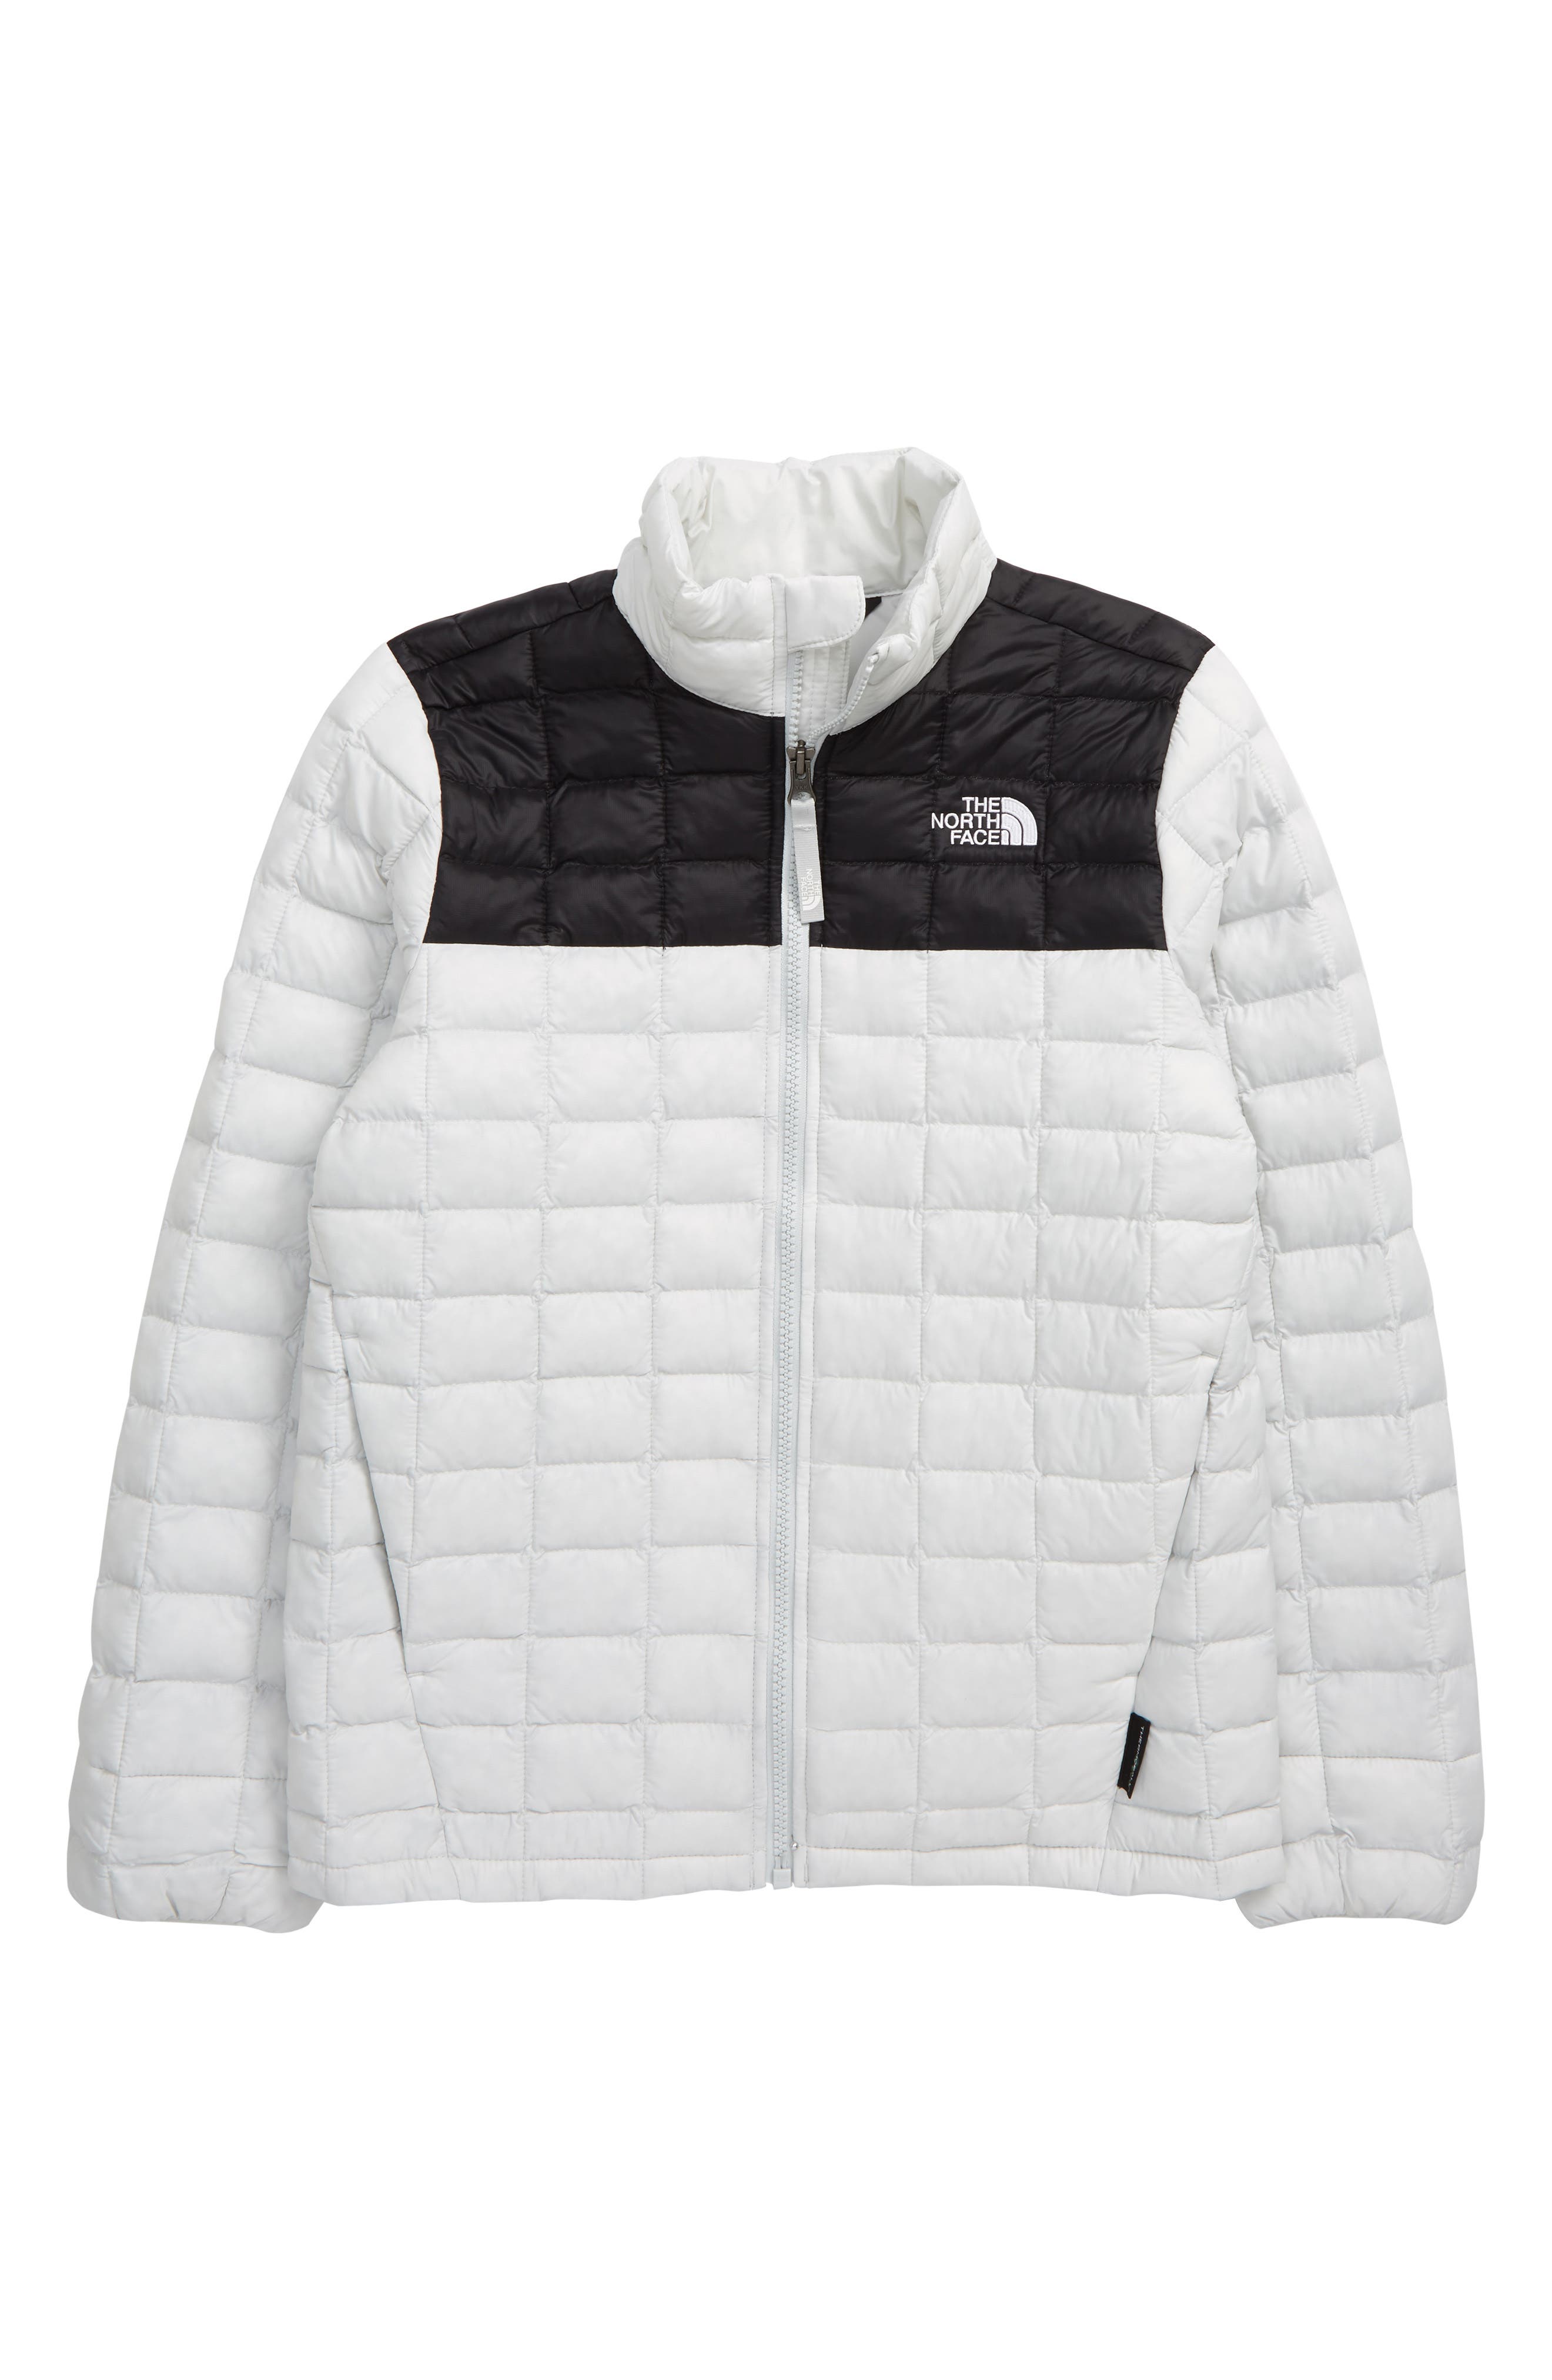 north face kids thermoball